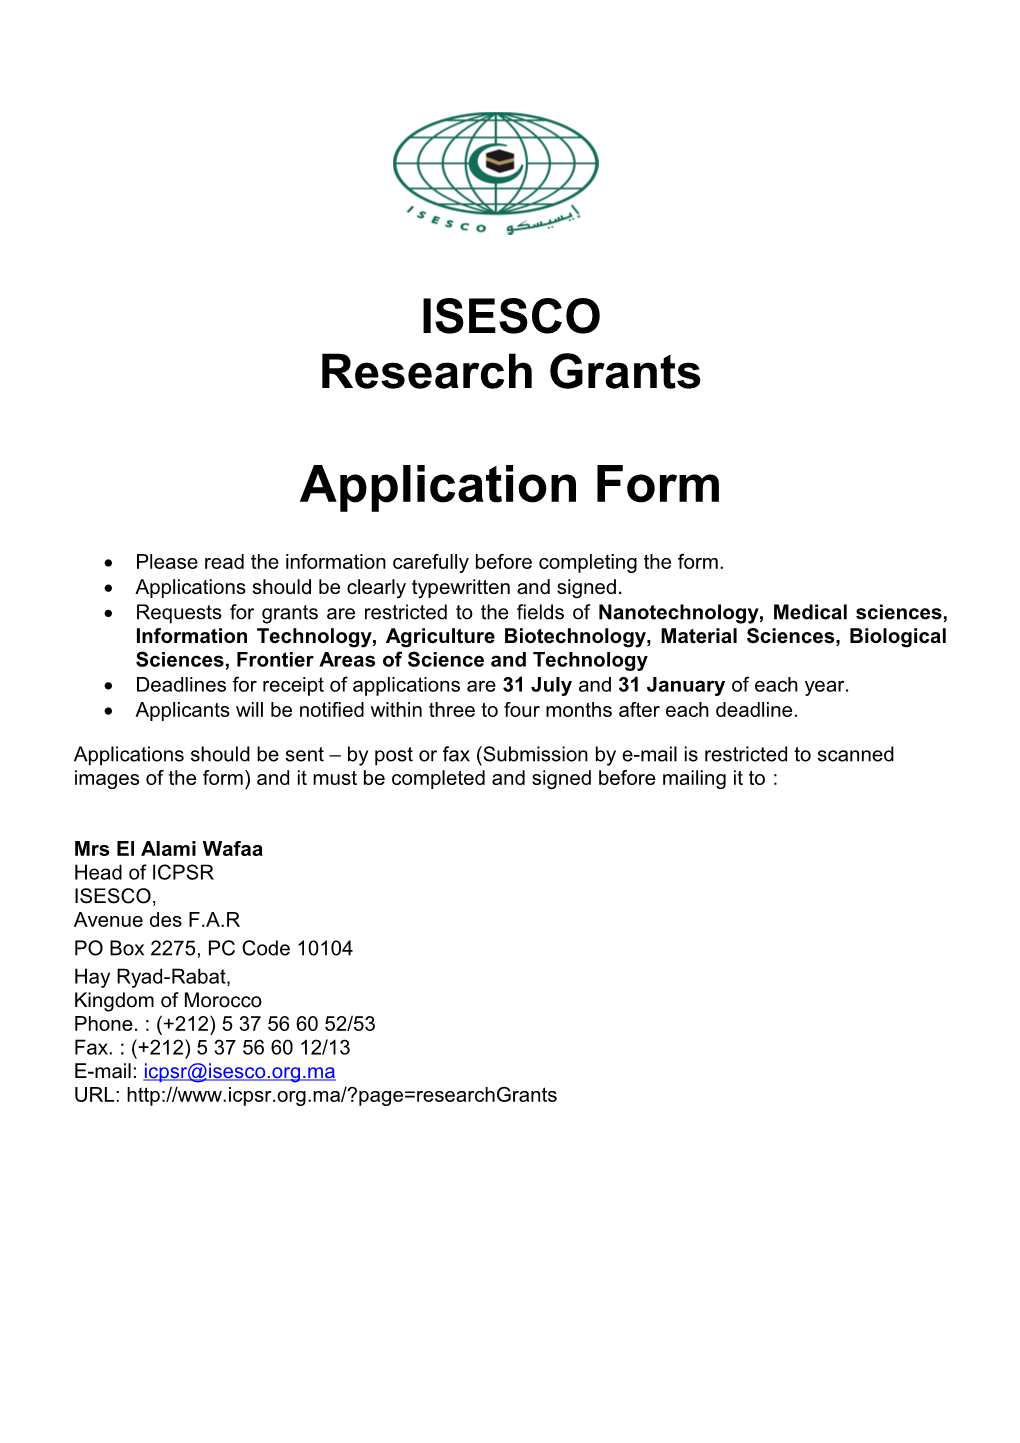 ISESCO-COMSTECH Joint Research Grants Proposal Form